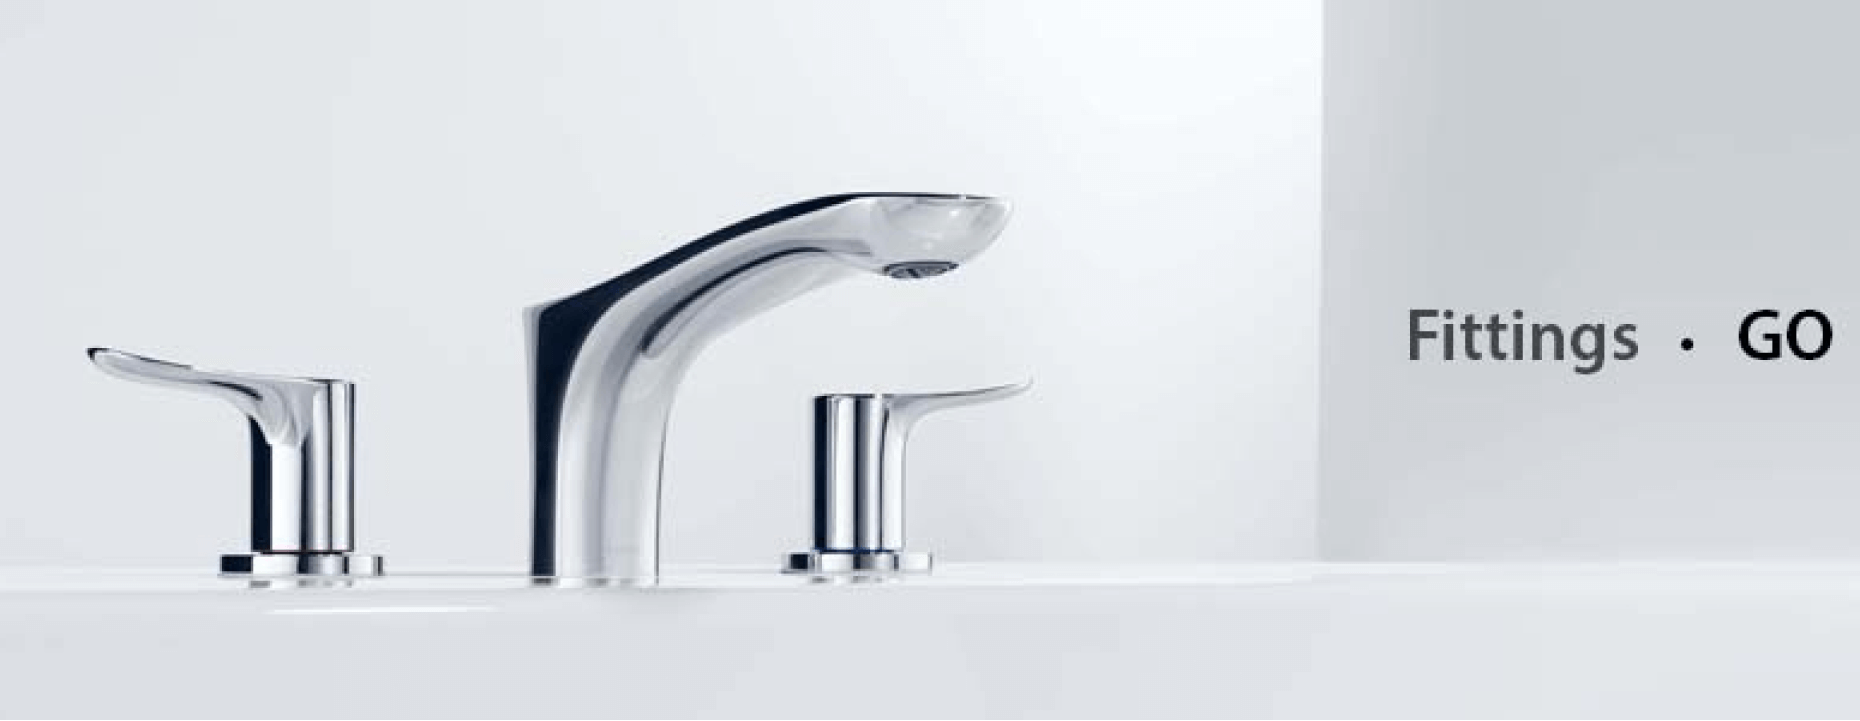 Single Lever Washbasin Faucet w/Pop-up Waste